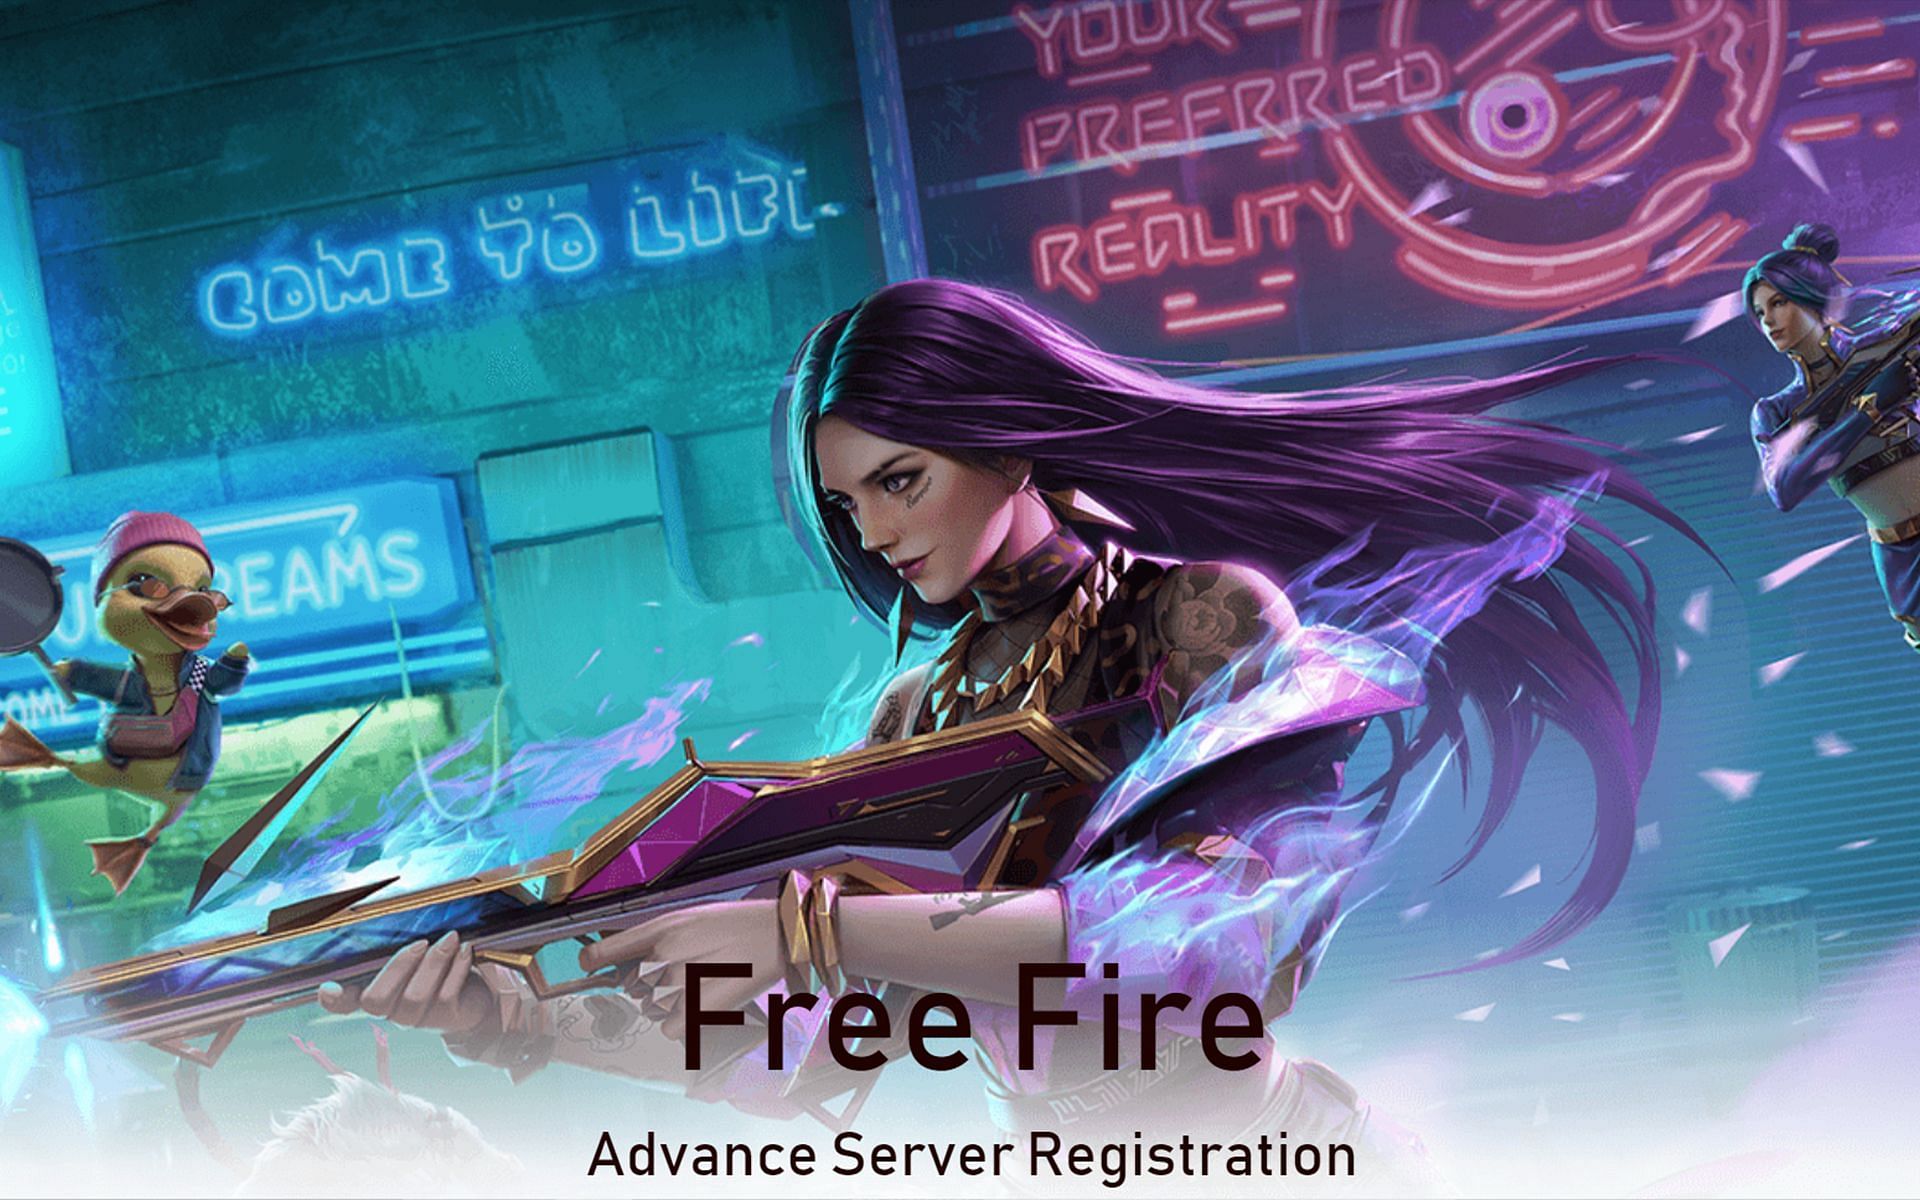 Players will have to register to receive the Activation code for the Advance Server (Image via Garena)